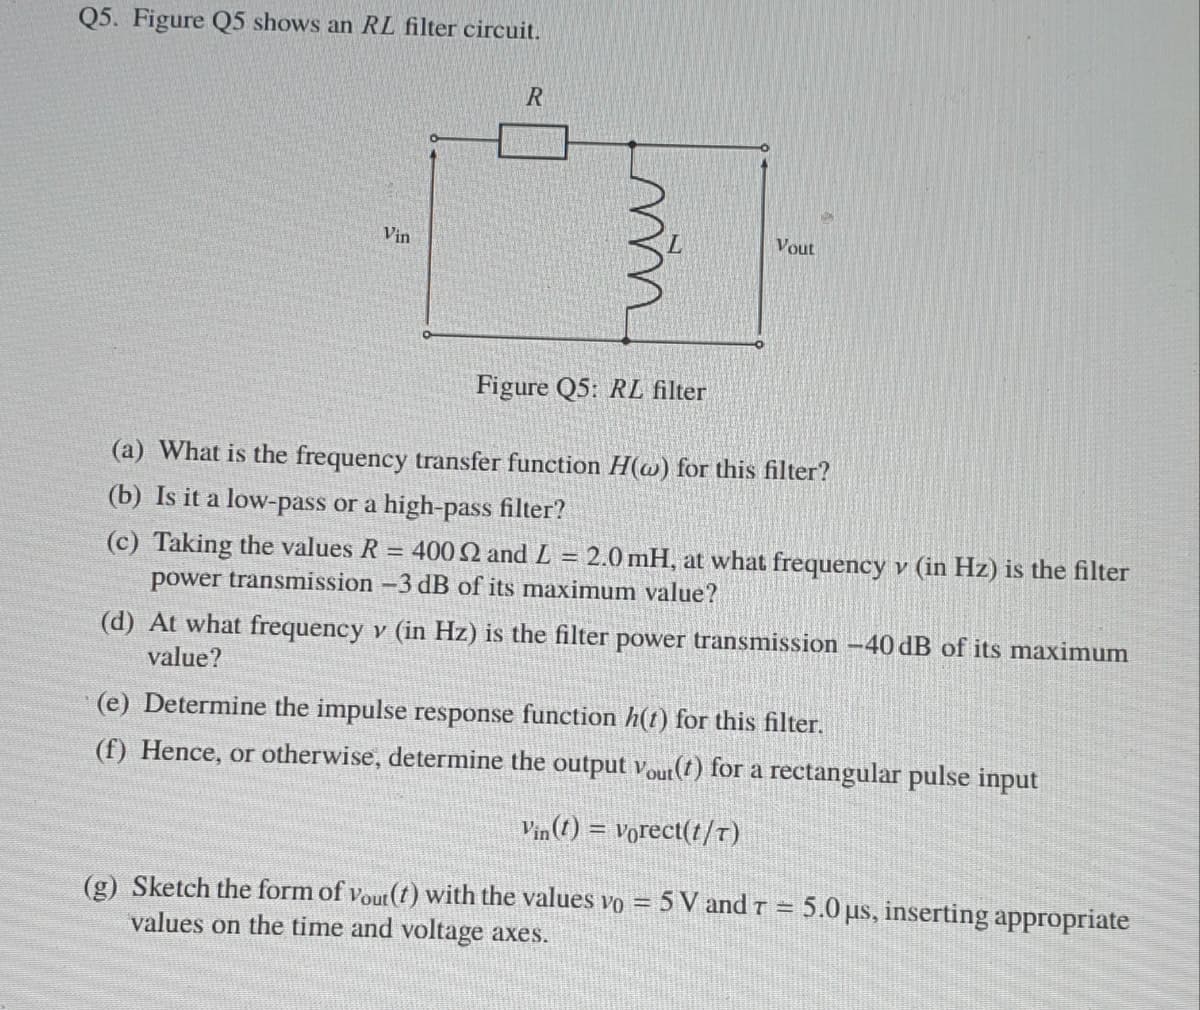 Q5. Figure Q5 shows an RL filter circuit.
Vin
Vout
Figure Q5: RL filter
(a) What is the frequency transfer function H(@) for this filter?
(b) Is it a low-pass or a high-pass filter?
(c) Taking the values R = 400 2 and L = 2.0 mH, at what frequency v (in Hz) is the filter
power transmission -3 dB of its maximum value?
(d) At what frequency v (in Hz) is the filter power transmission –40 dB of its maximum
value?
(e) Determine the impulse response function h(t) for this filter.
(f) Hence, or otherwise, determine the output Vout(t) for a rectangular pulse input
Vin (1) = vorect(t/T)
(g) Sketch the form of vout (t) with the values vo = 5 V and r = 5.0 us, inserting appropriate
values on the time and voltage axes.
